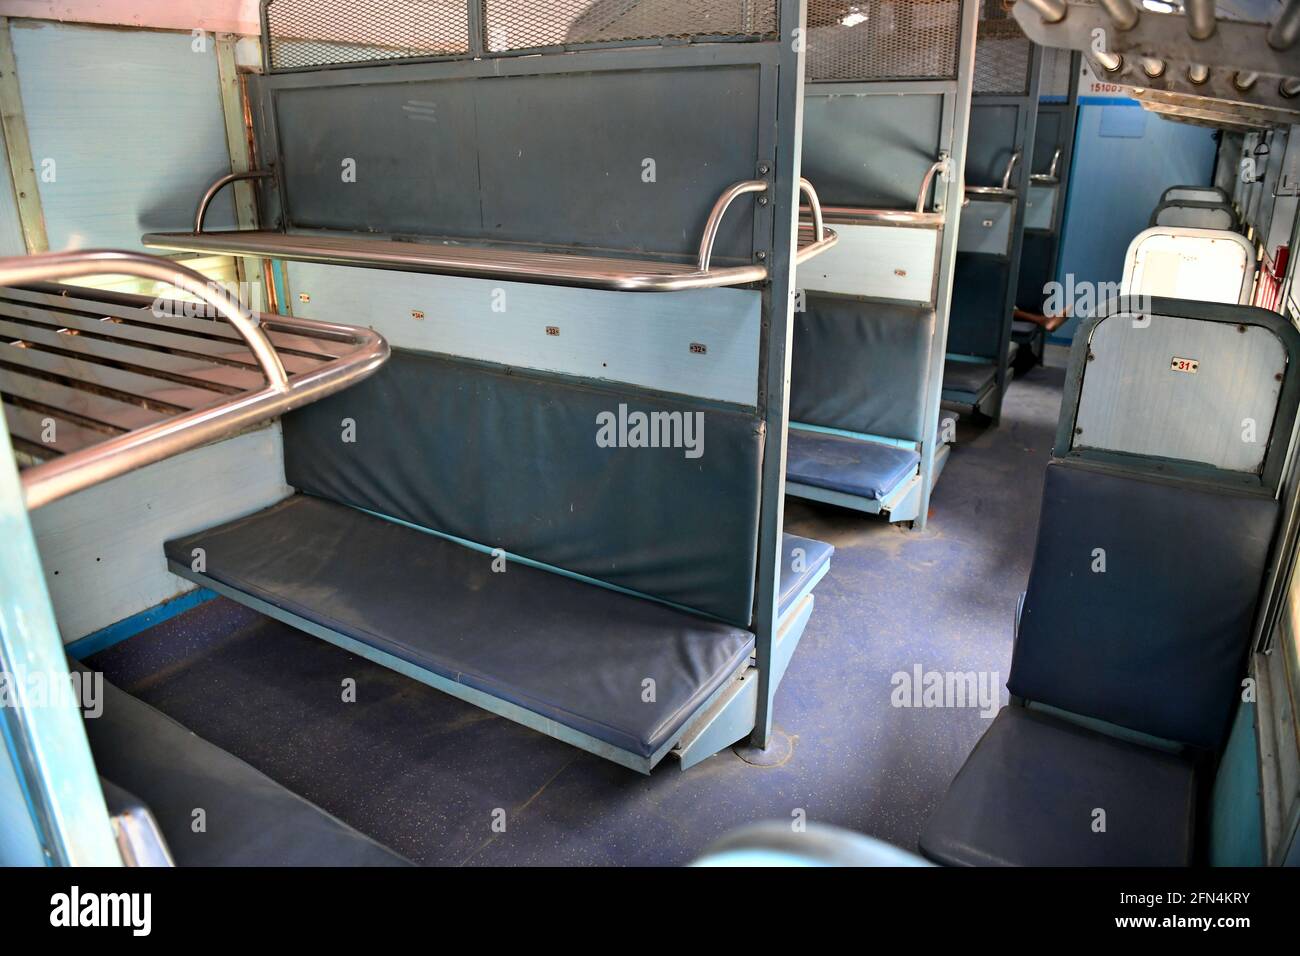 Beawar, Rajasthan, India, May 13, 2021: Dust on seats in a coach of Ranikhet Express train at station amid COVID-19 lockdown due to second wave of coronavirus pandemic in Beawar. Indian Railways cancelled several special and express trains with passenger trains over the past few weeks due to low occupancy. Credit: Sumit Saraswat/Alamy Live News Stock Photo